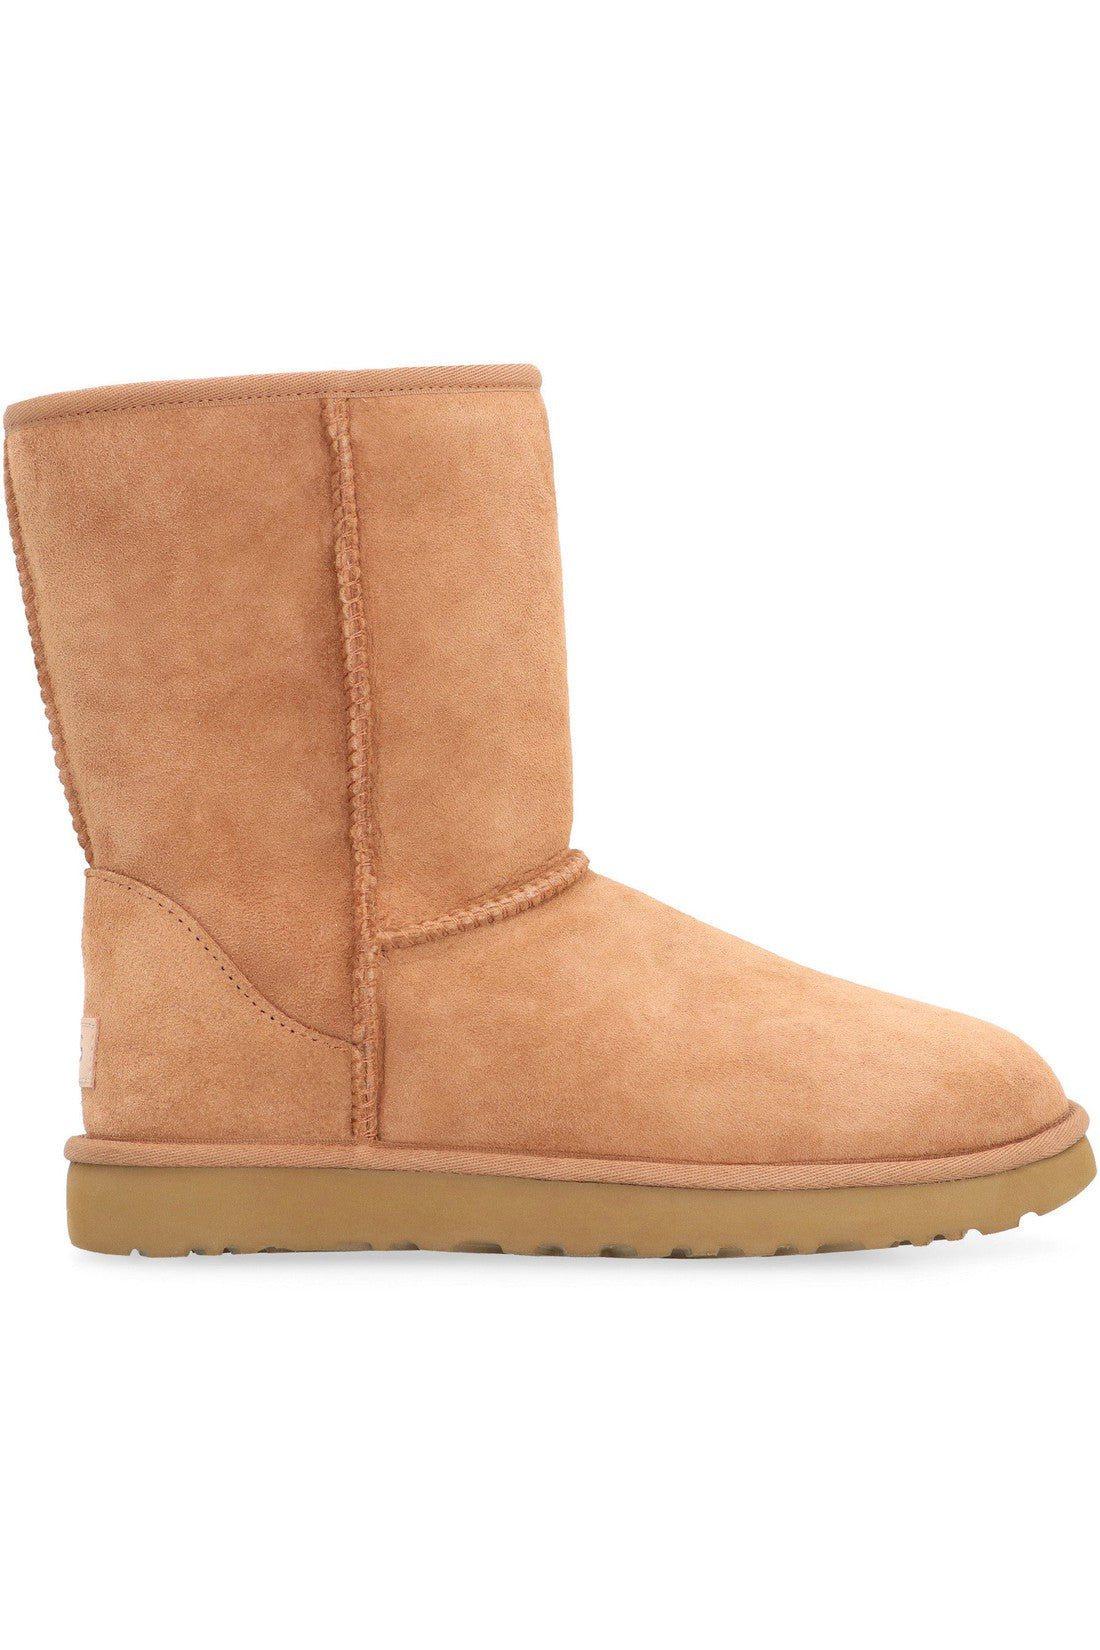 UGG-OUTLET-SALE-Classic Short II ankle boots-ARCHIVIST